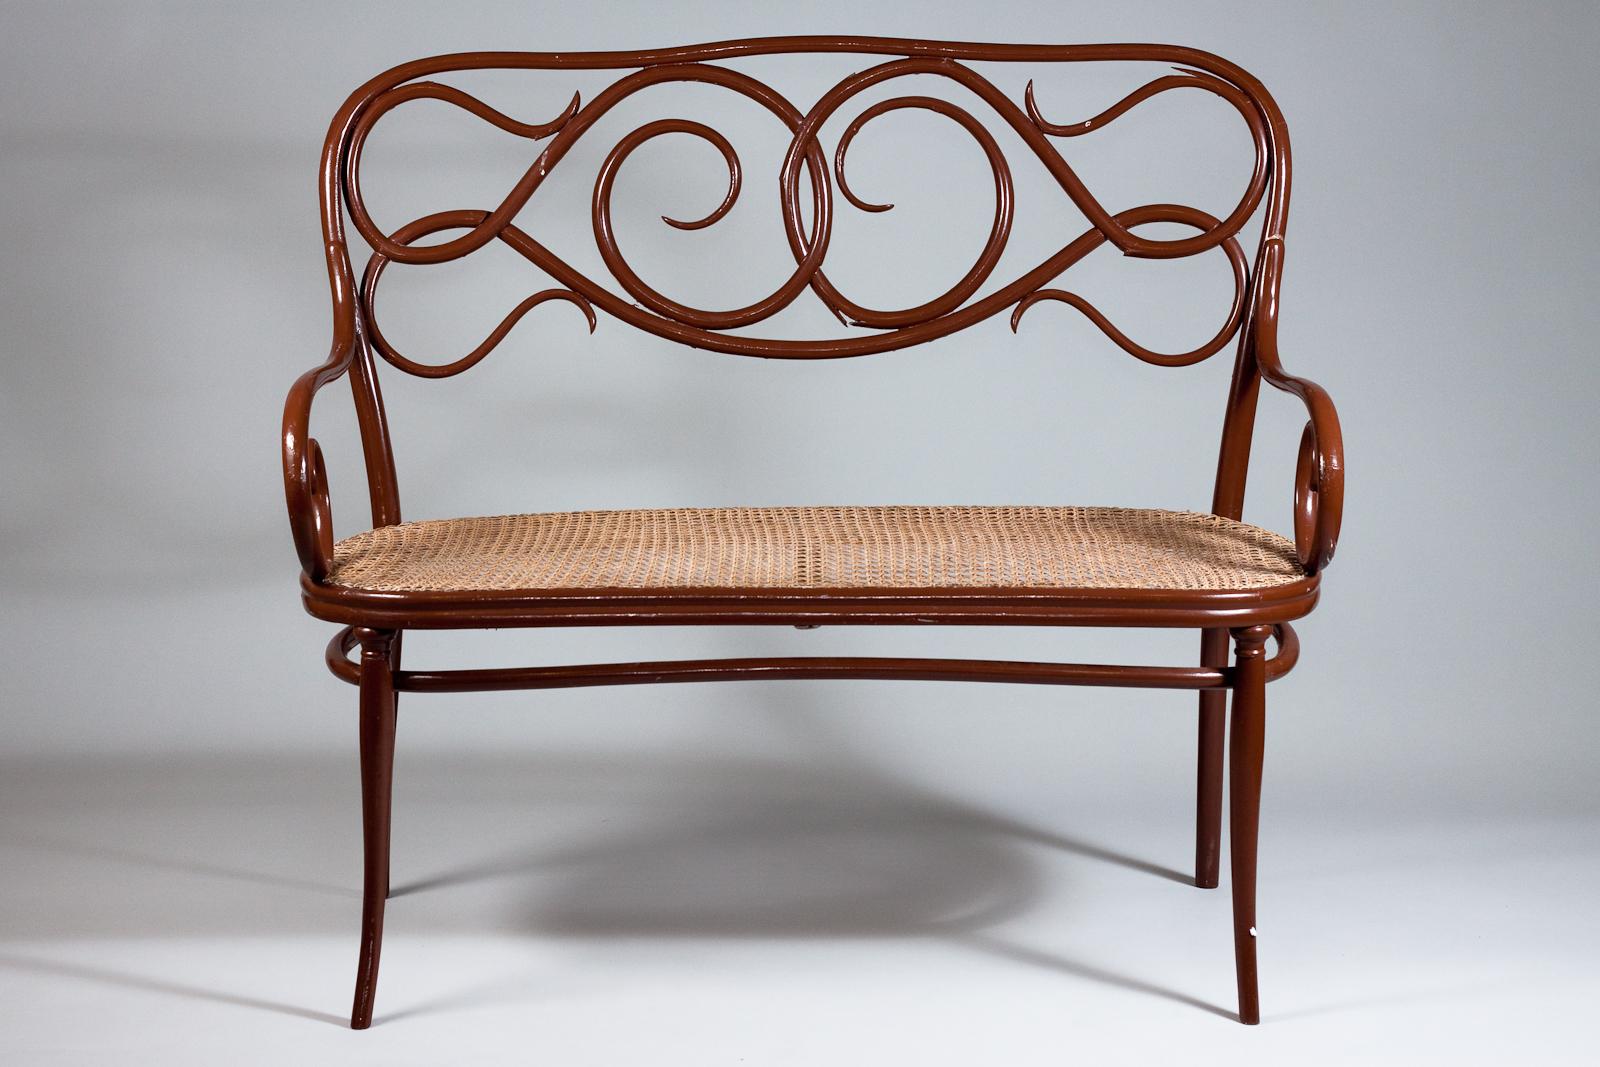 Antique Thonet No. 2 Bentwood Sofa , late 19th century In Fair Condition For Sale In Turku, Varsinais-Suomi